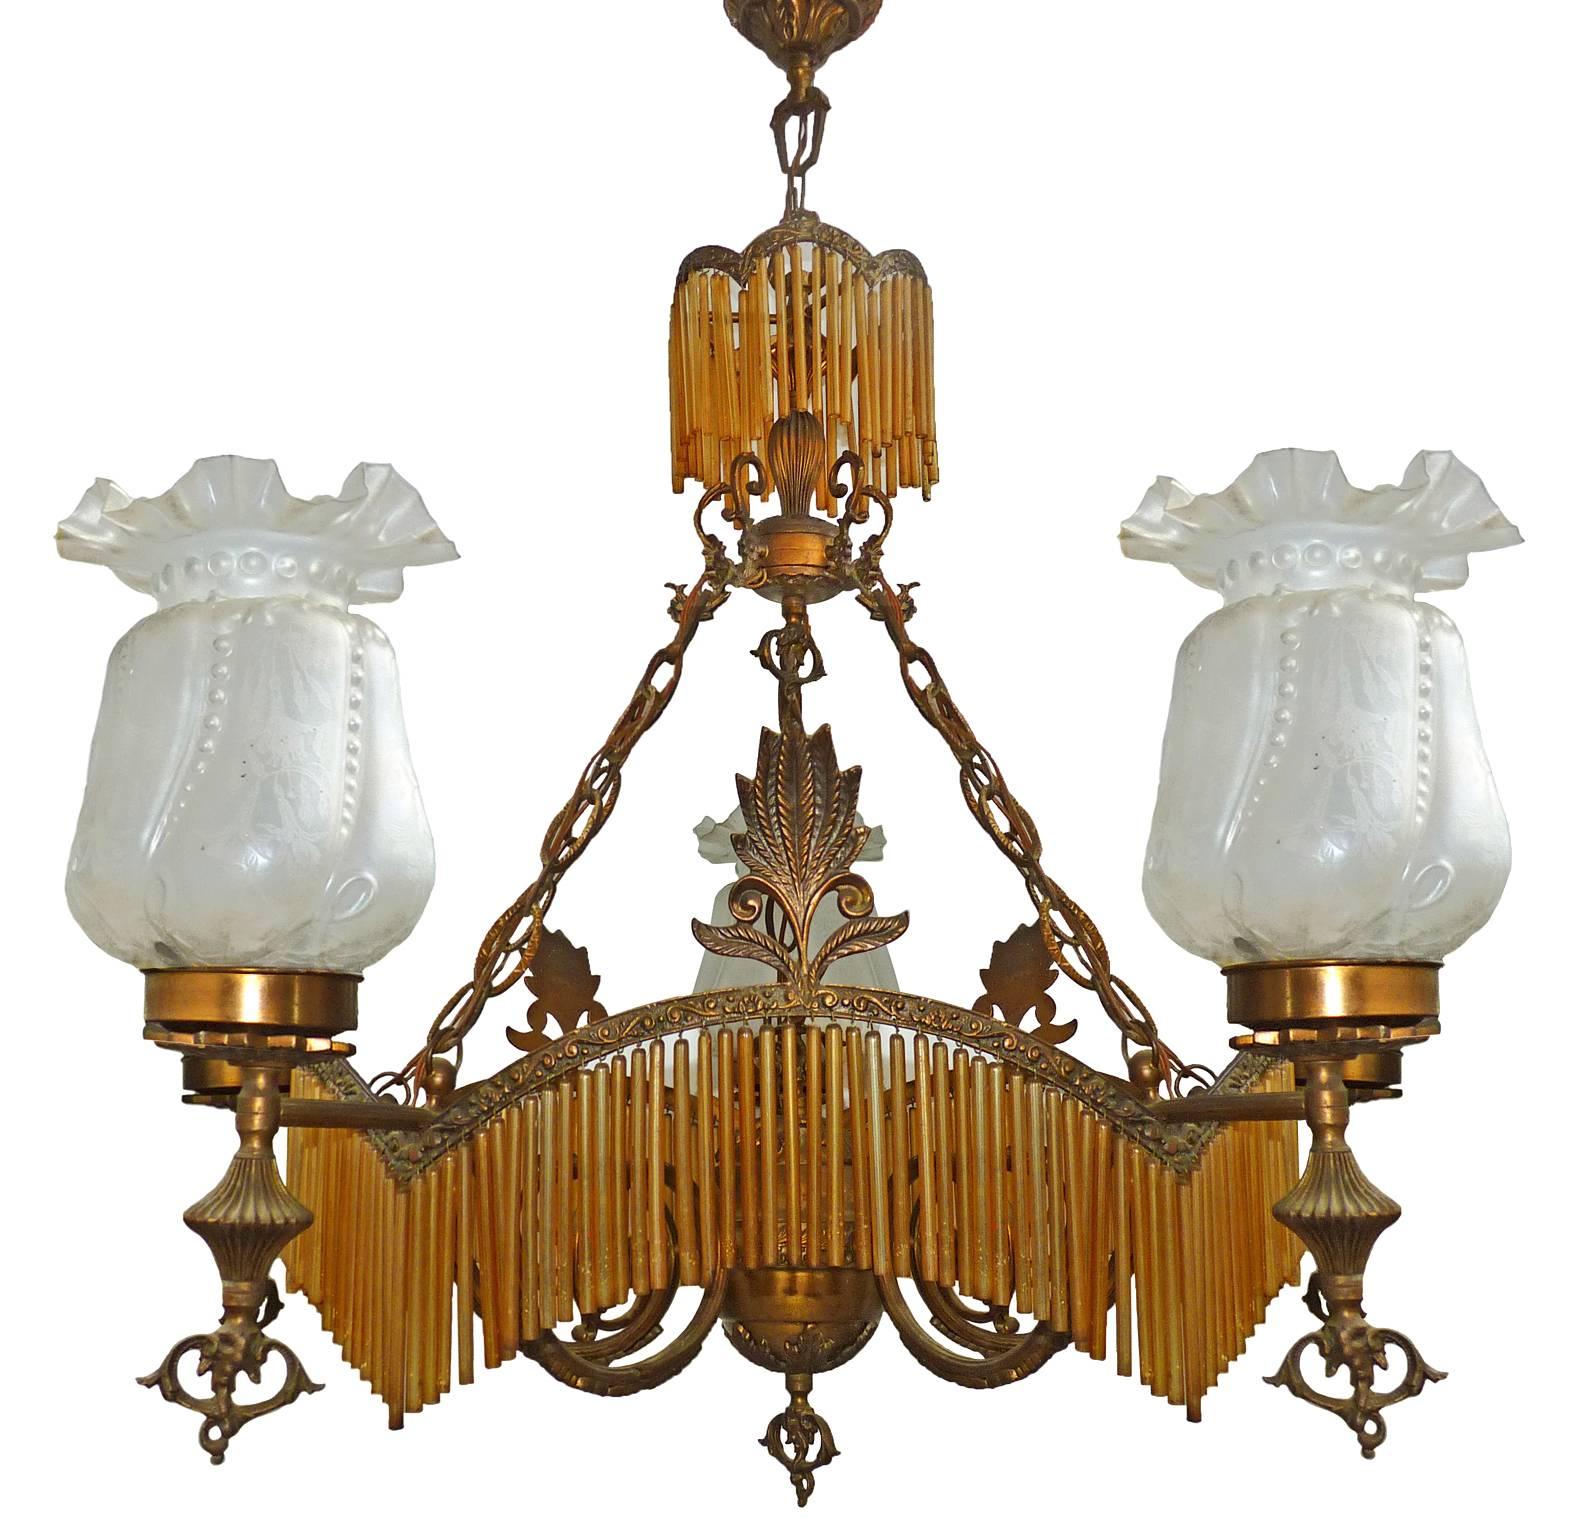 Gorgeous Antique French chandelier in amber glass tubes, Art Deco / Art Nouveau
Measures:
Diameter 36 in / 90 cm
Height 40 in / 100 cm
Glass shades 6,3 in (16 cm) / 8,3 in (21 cm)
Five light bulbs E 14/ good working condition.
Weight: 30 lb. (14